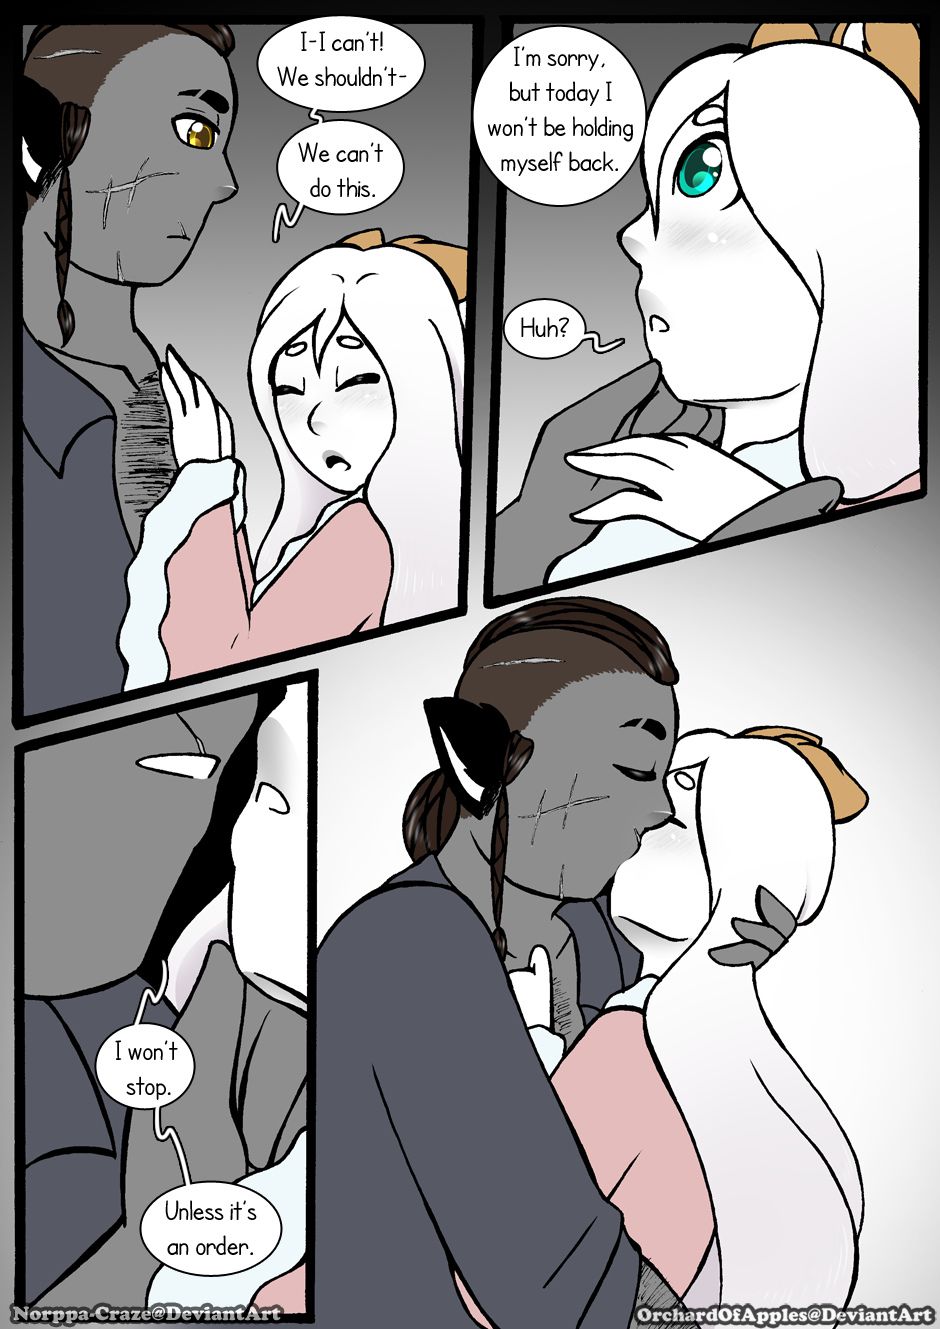 [Jeny-jen94] Between Kings and Queens [Ongoing] 344